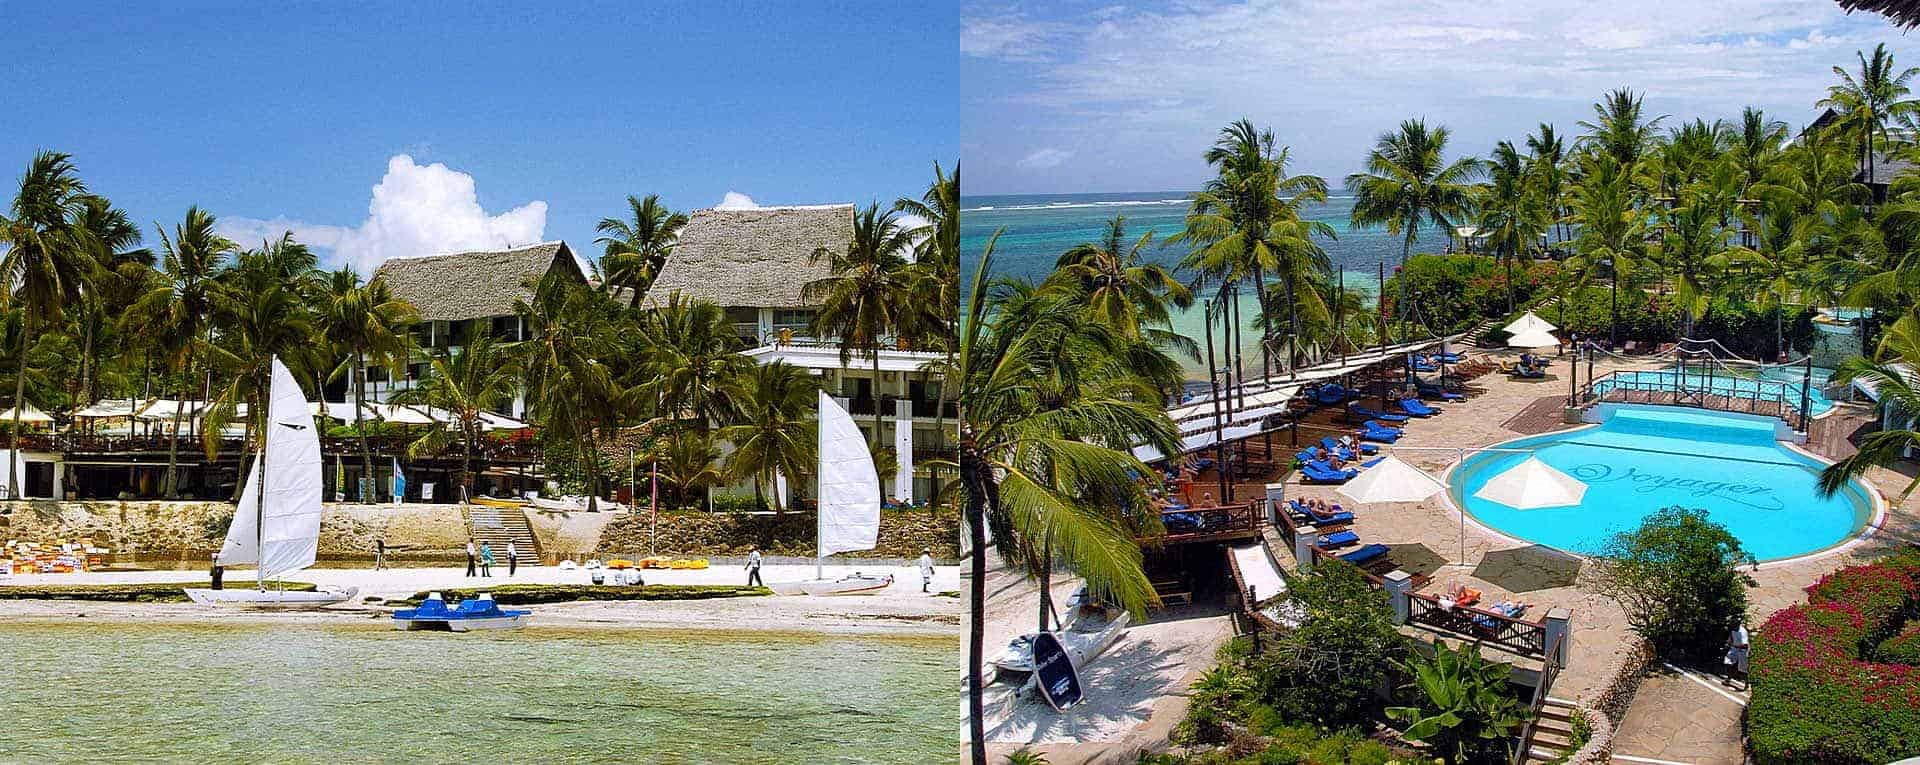 who owns voyager beach resort